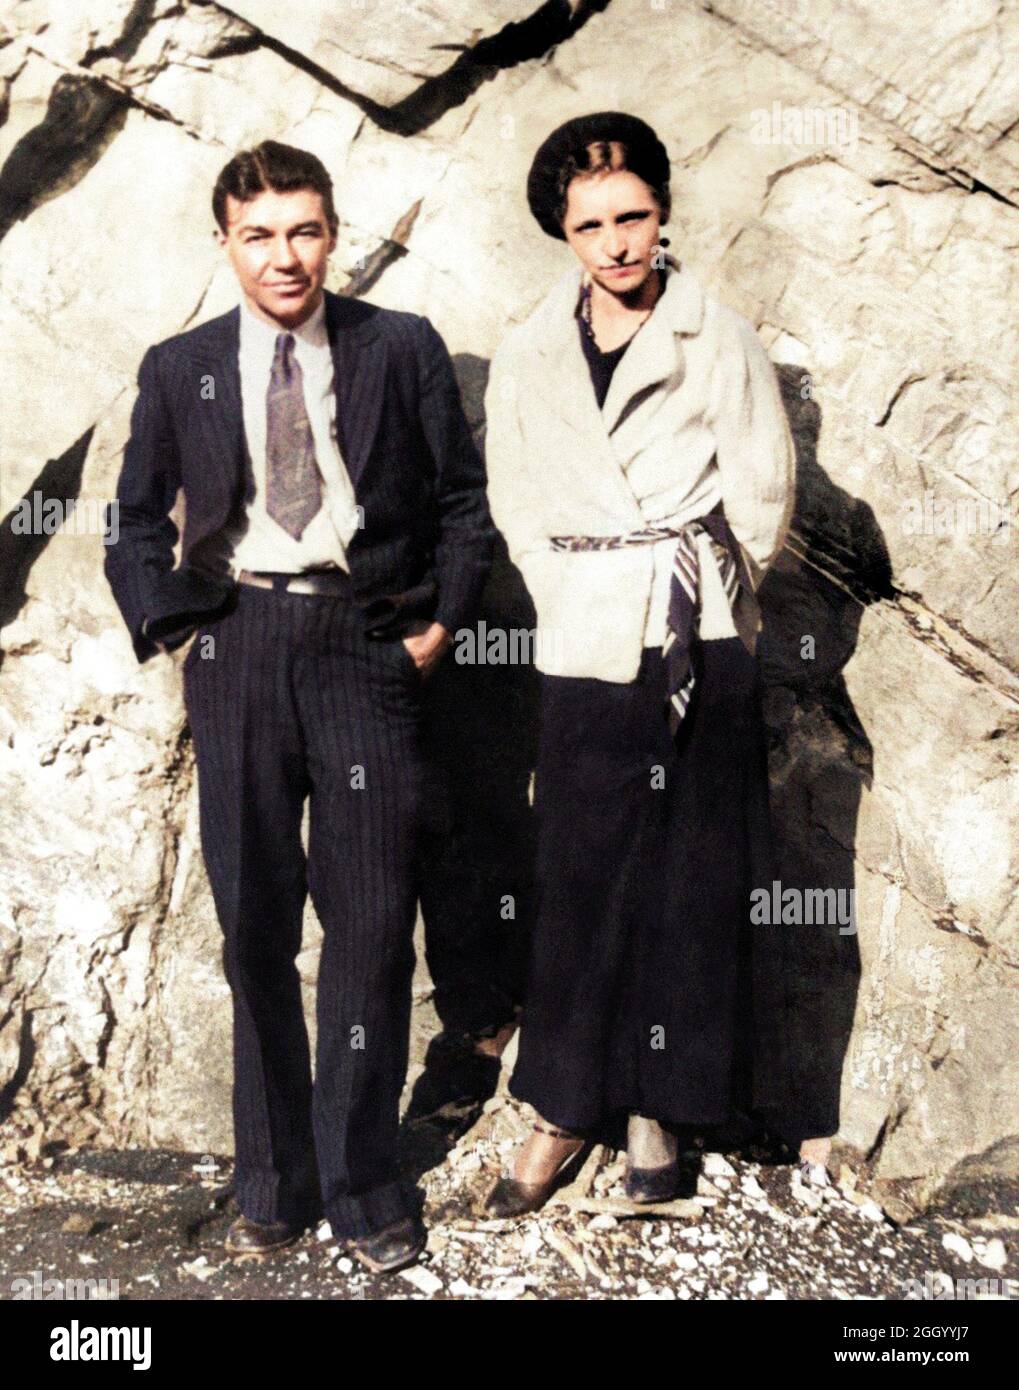 1934 , Arkansas , USA : The famous gangsterns  BONNIE PARKER  ( 1910 - 1934 ) and CLYDE BARROW ( 1909 - 1934 ). Contrary to popular belief the two never married. They were in a long standing relationship . Unknown photographer . DIGITALLY COLORIZED . - OUTLAWS - KILLER - ASSASSINO - delinquente - criminalità organizzata  - GANGSTERN - Bos - CRONACA NERA - CRIMINALE  - hat - cappello ---  Archivio GBB Stock Photo